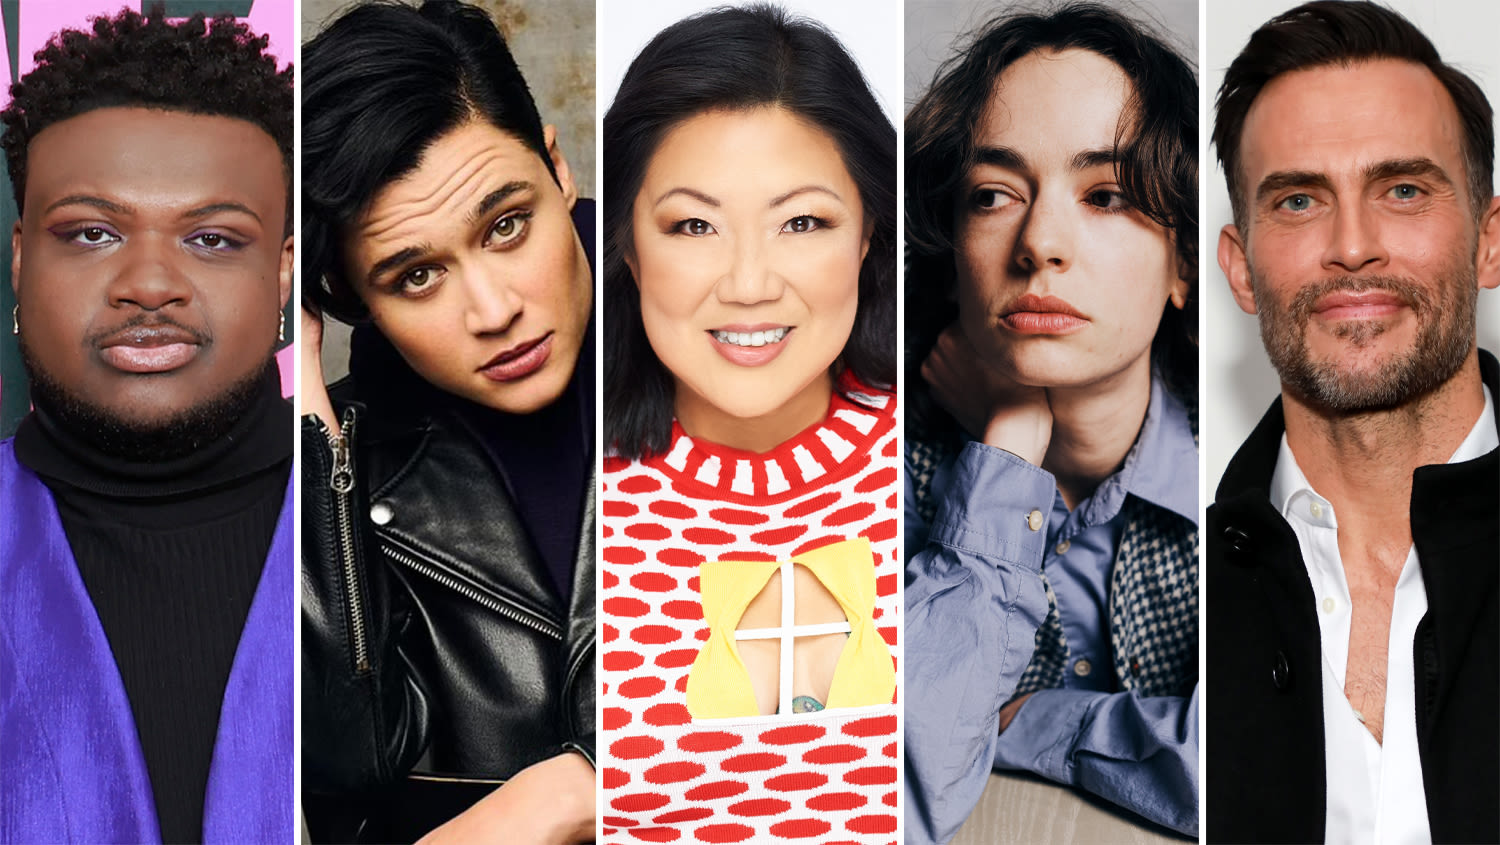 Jaquel Spivey, Katy O’Brian, Margaret Cho, Brigette Lundy-Paine, Cheyenne Jackson & More To Star In Tina Romero Zombie...